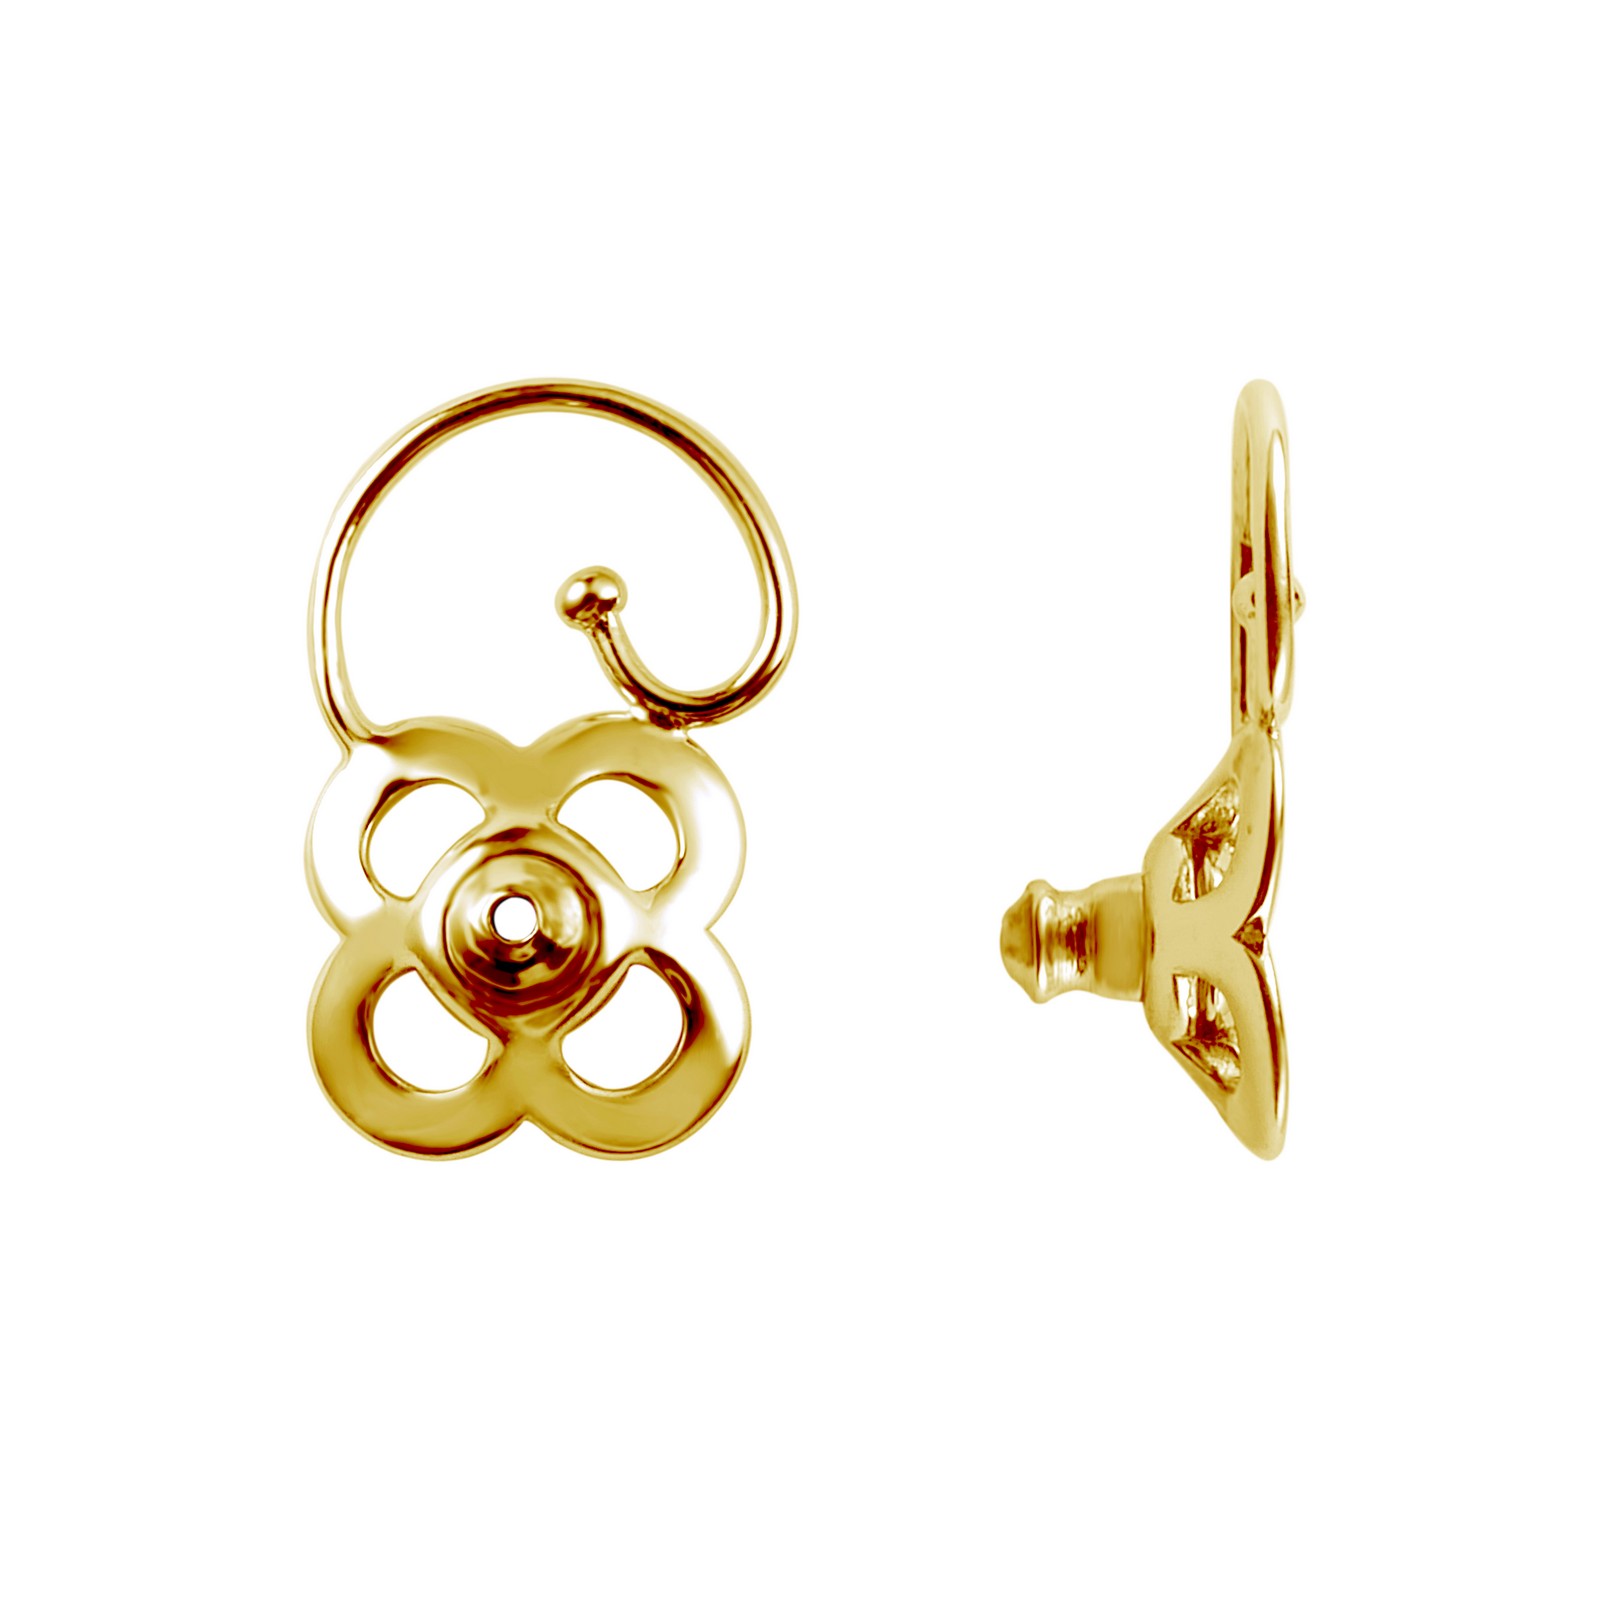 Lux-Clover Earring Backing Priddy Jewelers Elizabethtown, KY